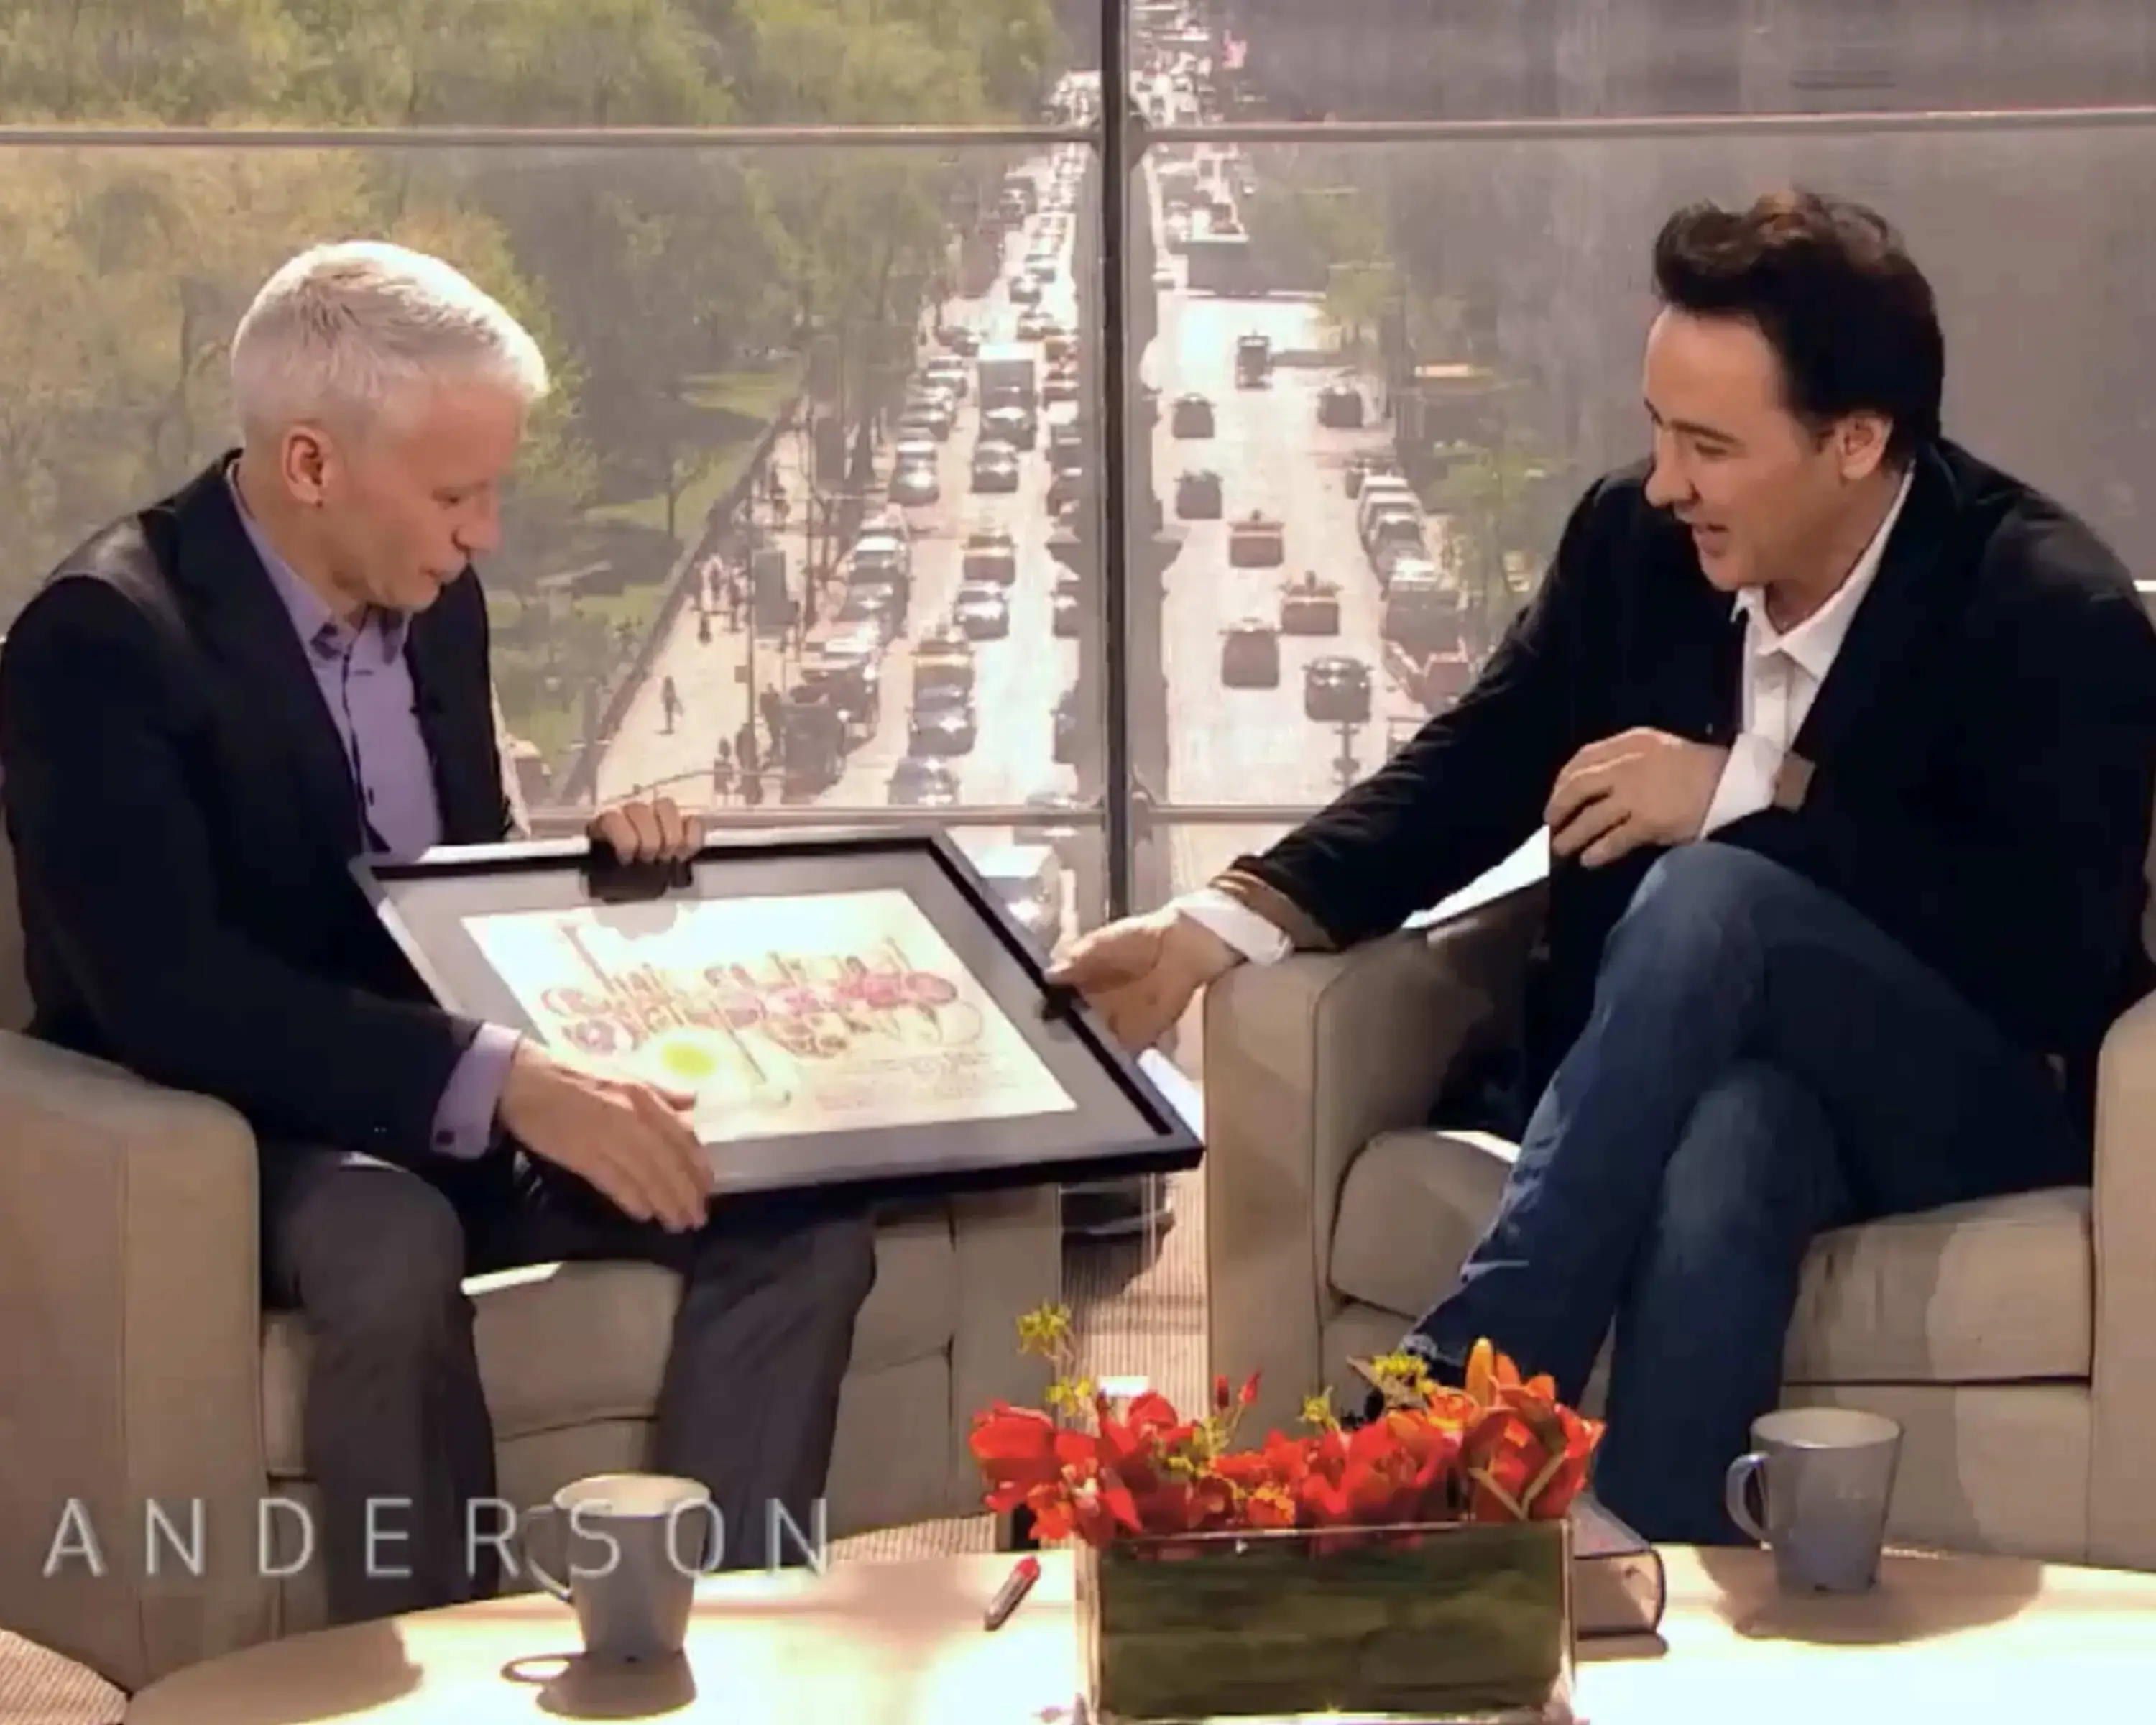 Celebrity television host Anderson Cooper presented movie actor John Cusack with a star gift from International Star Registry